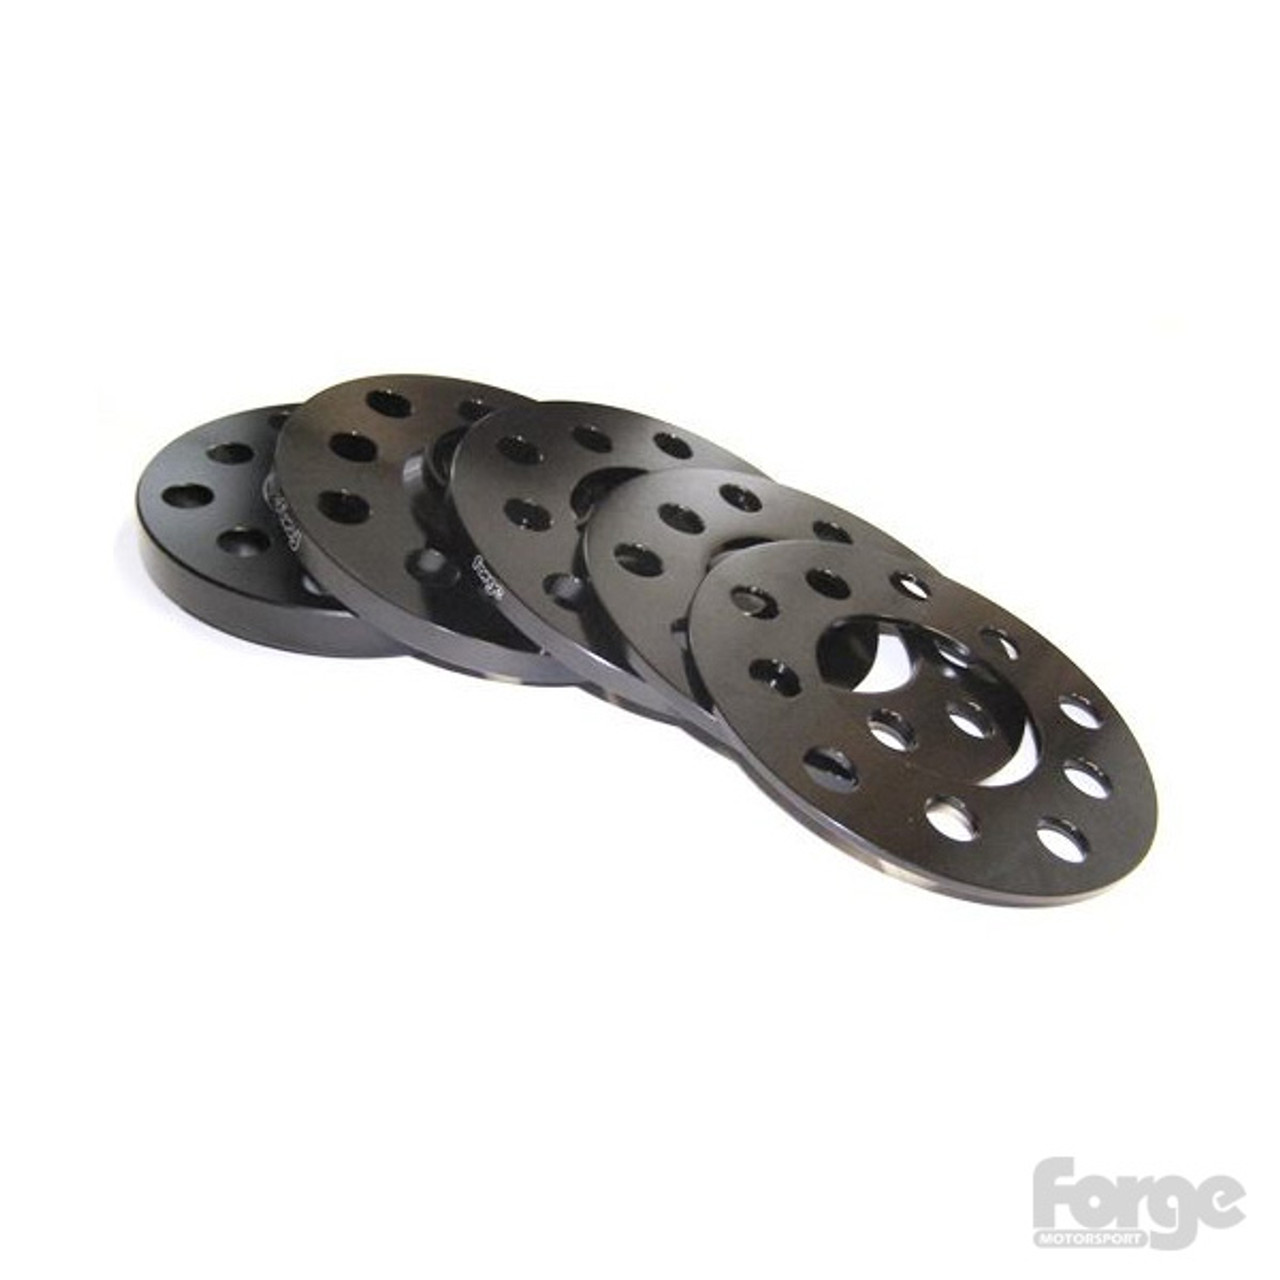 Forge 11mm (per side) hubcentric spacers (pair) Black 5x100/5x112